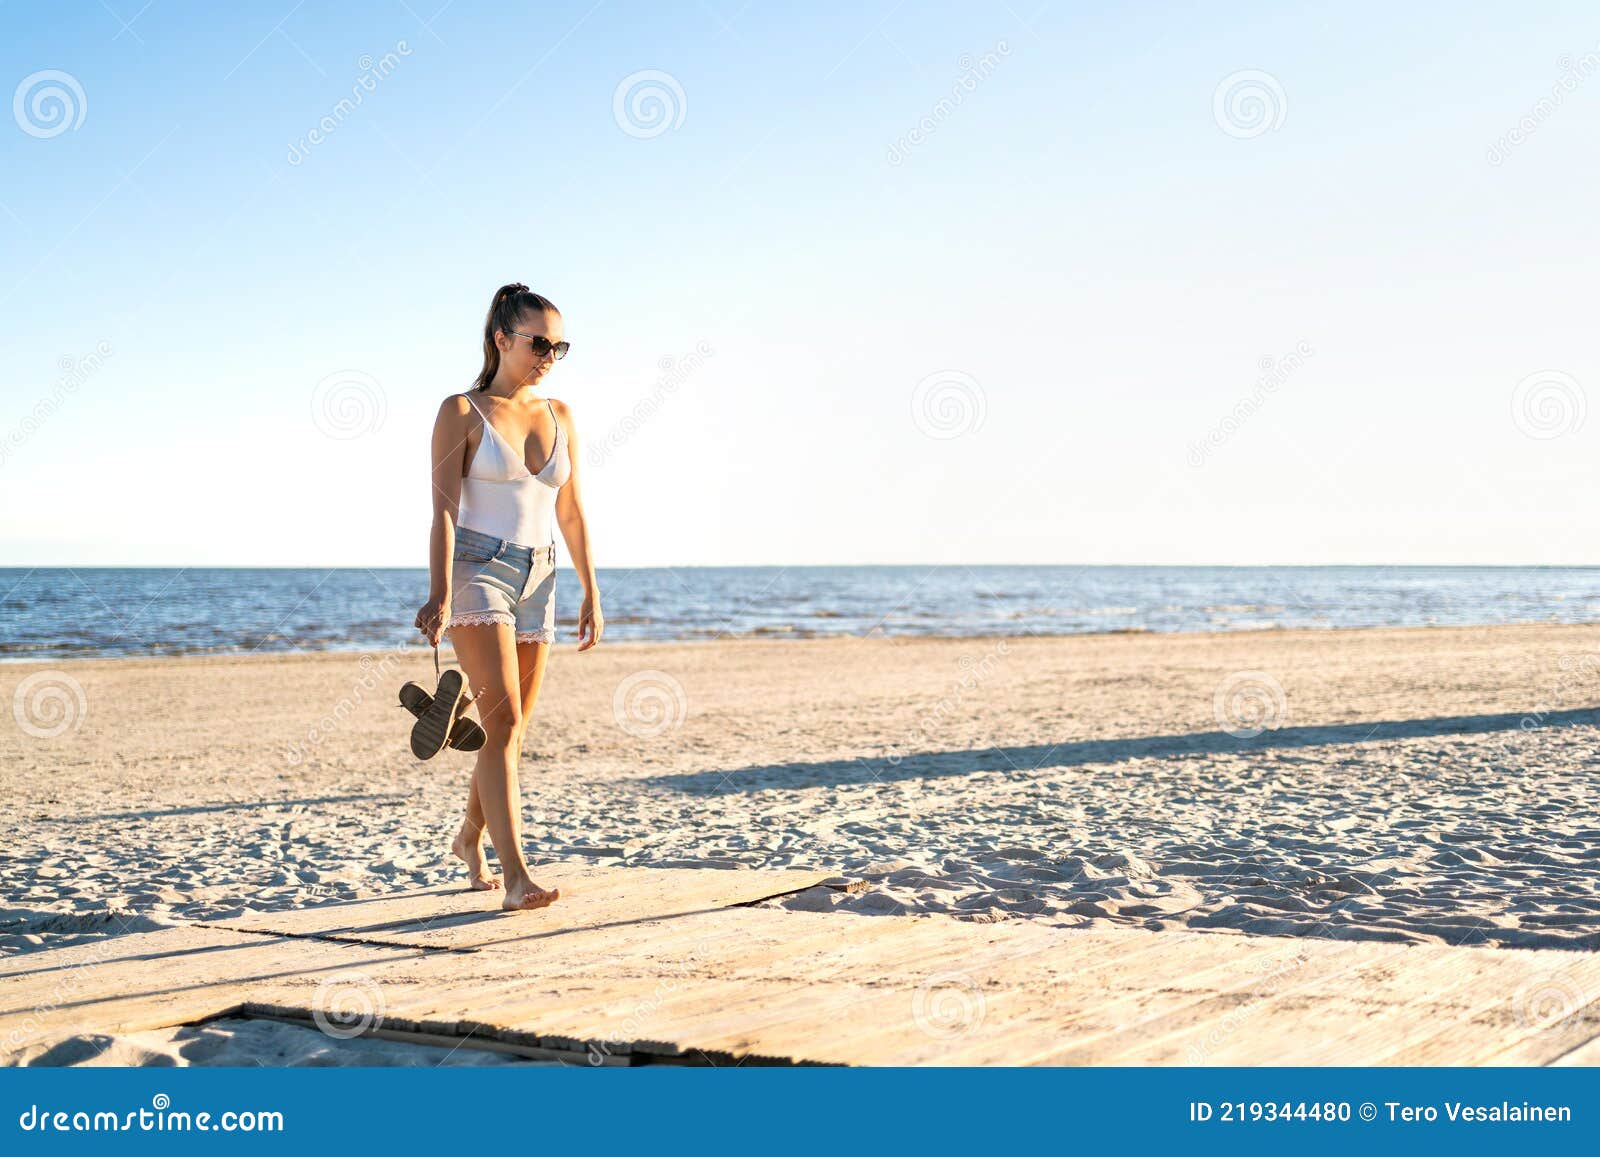 Thoughtful Lonely Woman Walking at an Empty Beach. Thinking about ...